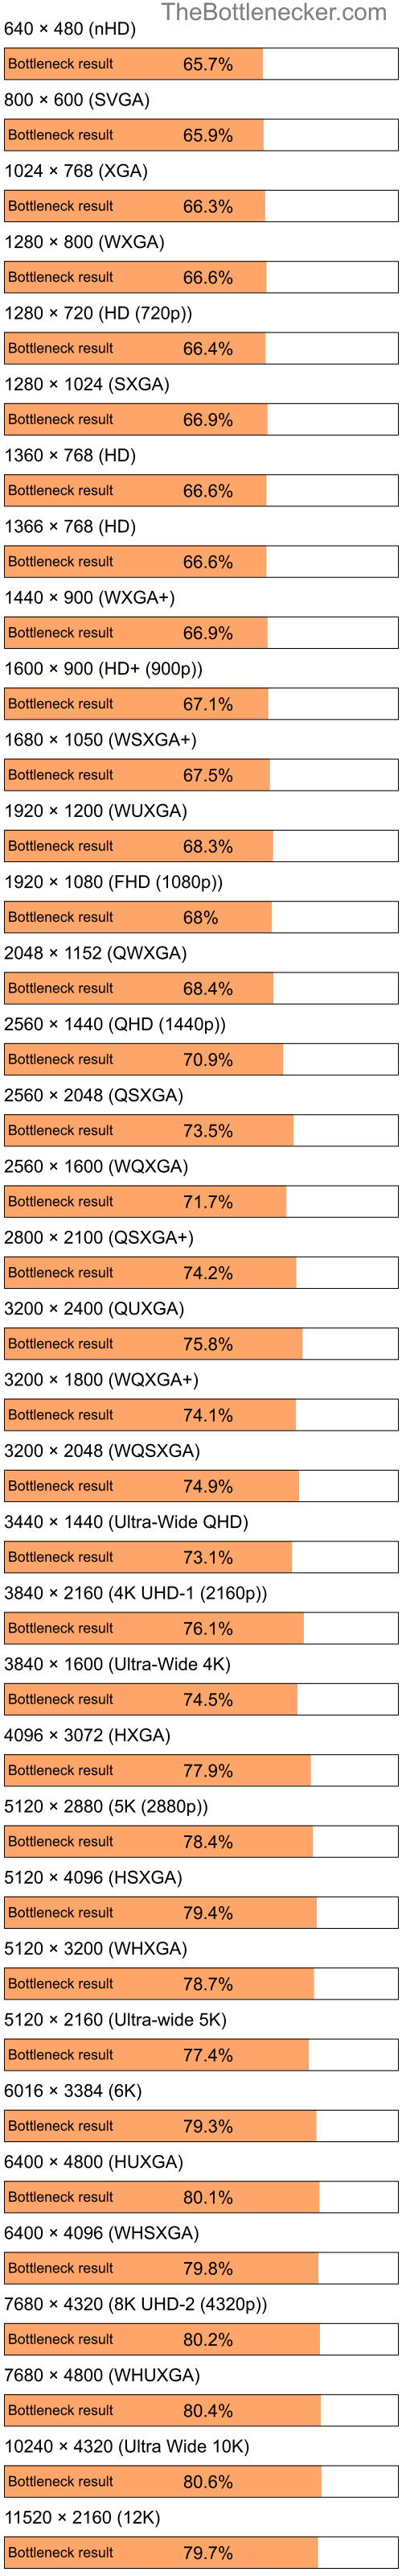 Bottleneck results by resolution for Intel Pentium 4 and AMD Radeon HD 3200 in General Tasks